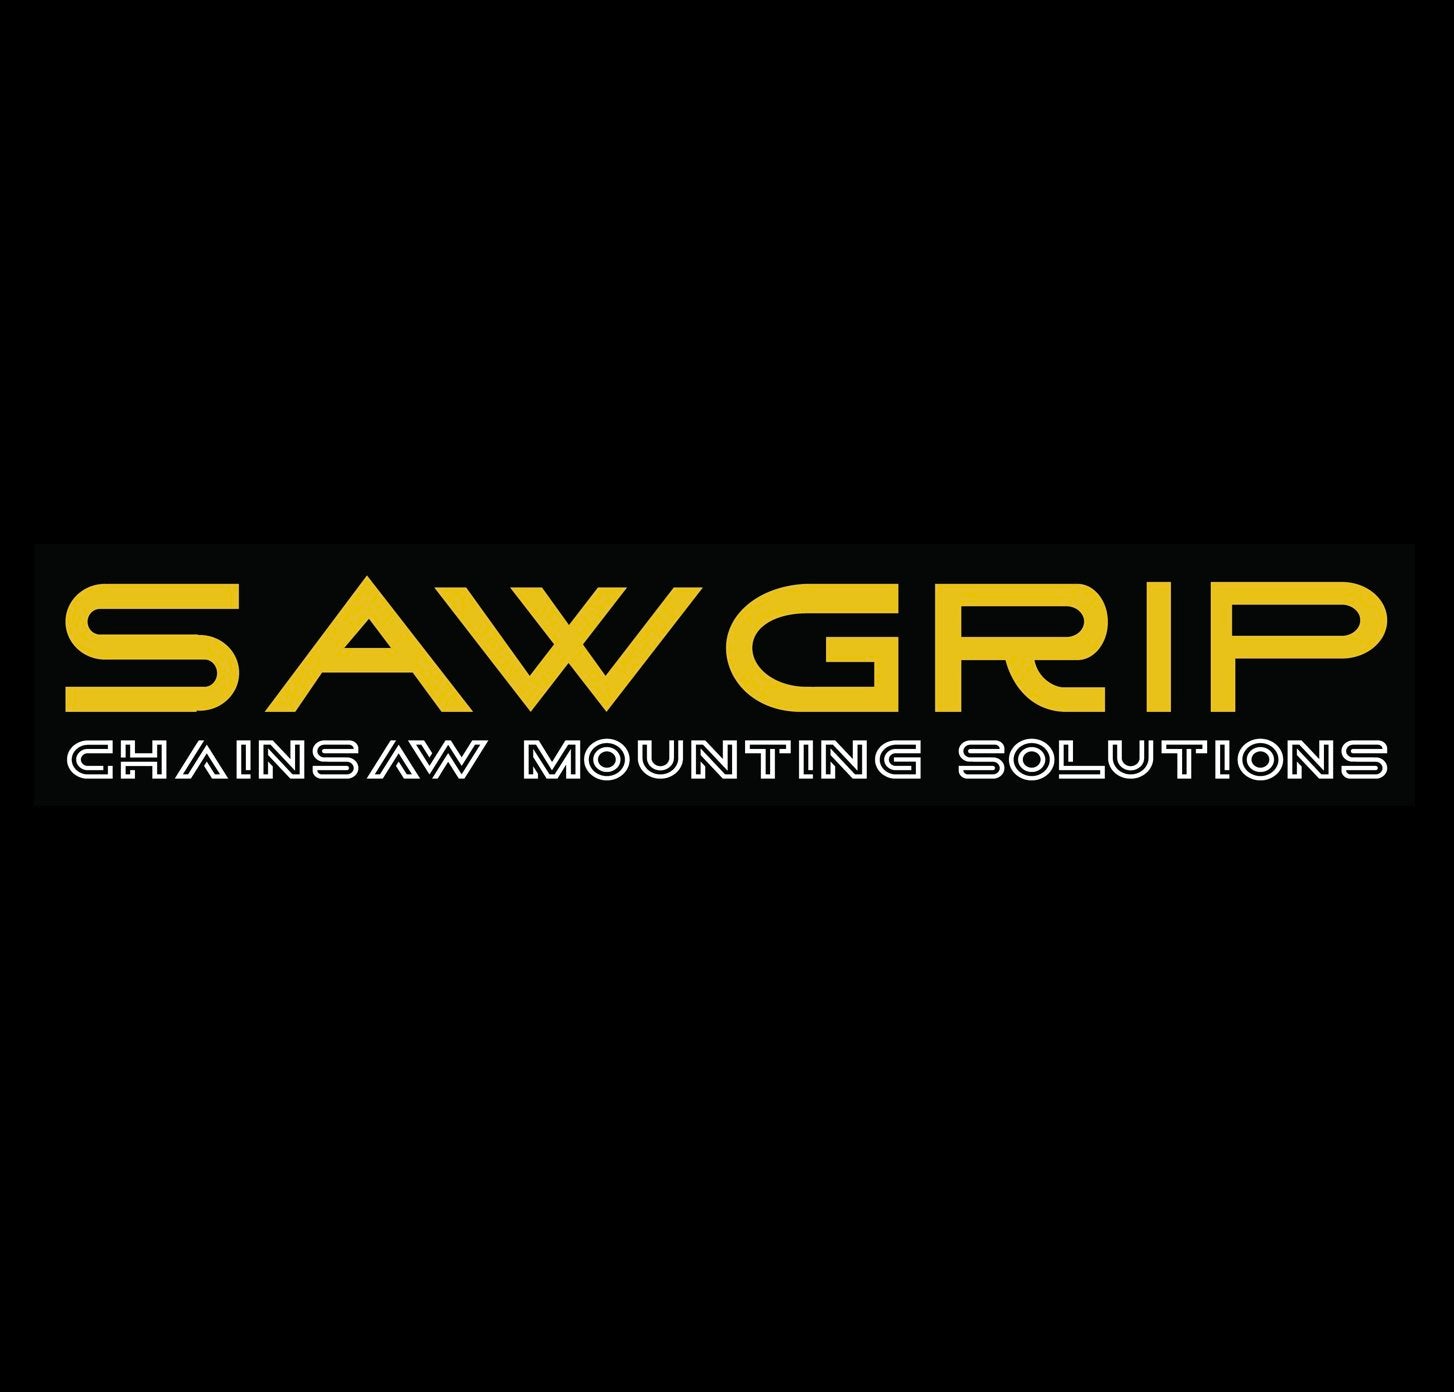 All SawGrip Products